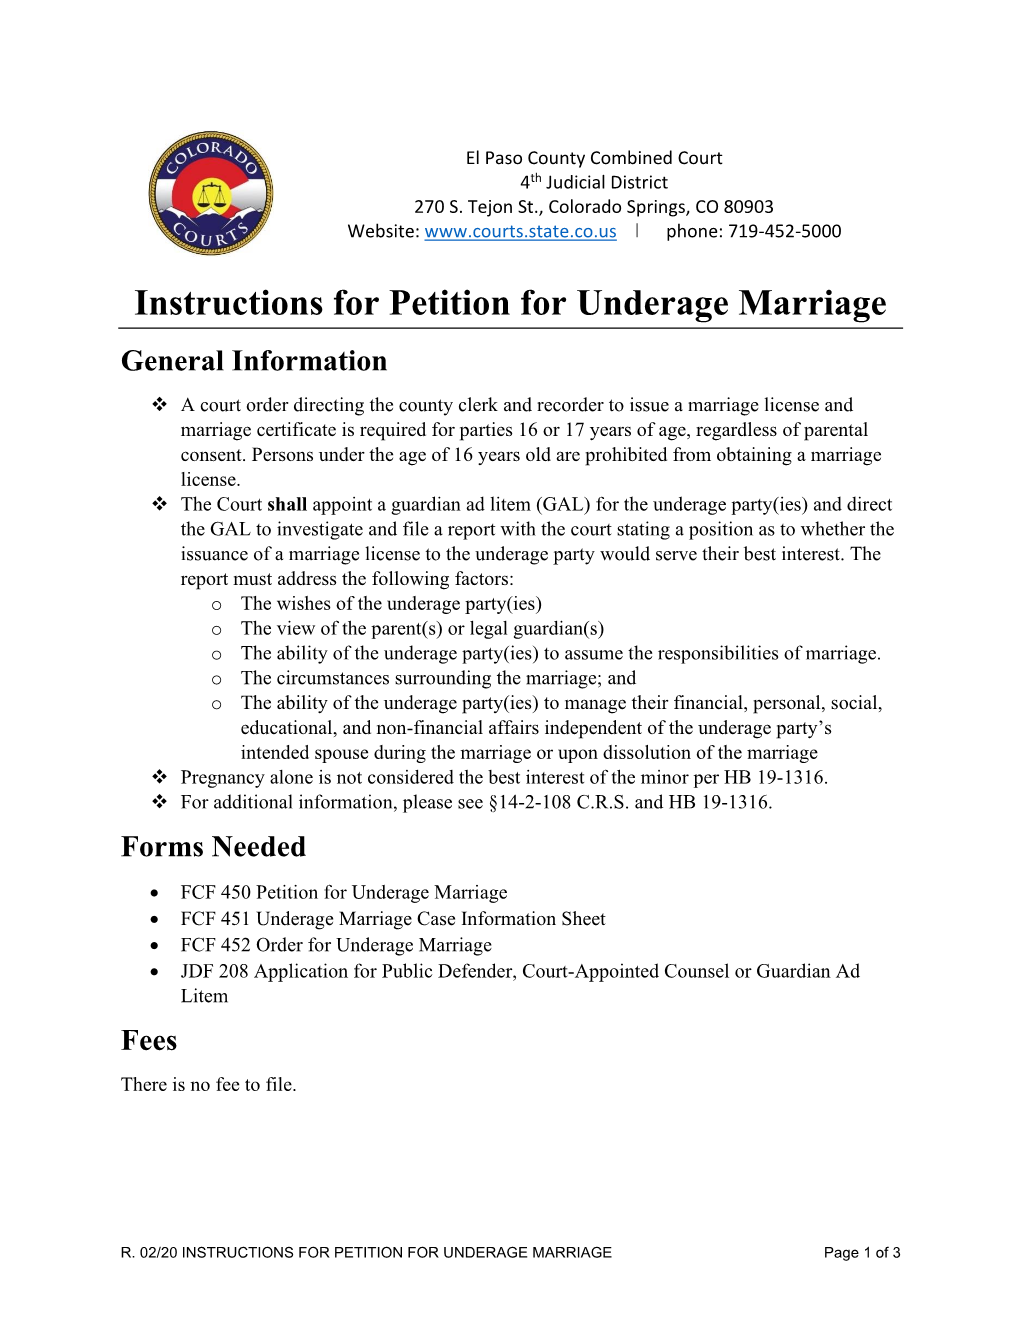 Instructions and Forms for Petition for Underage Marriage